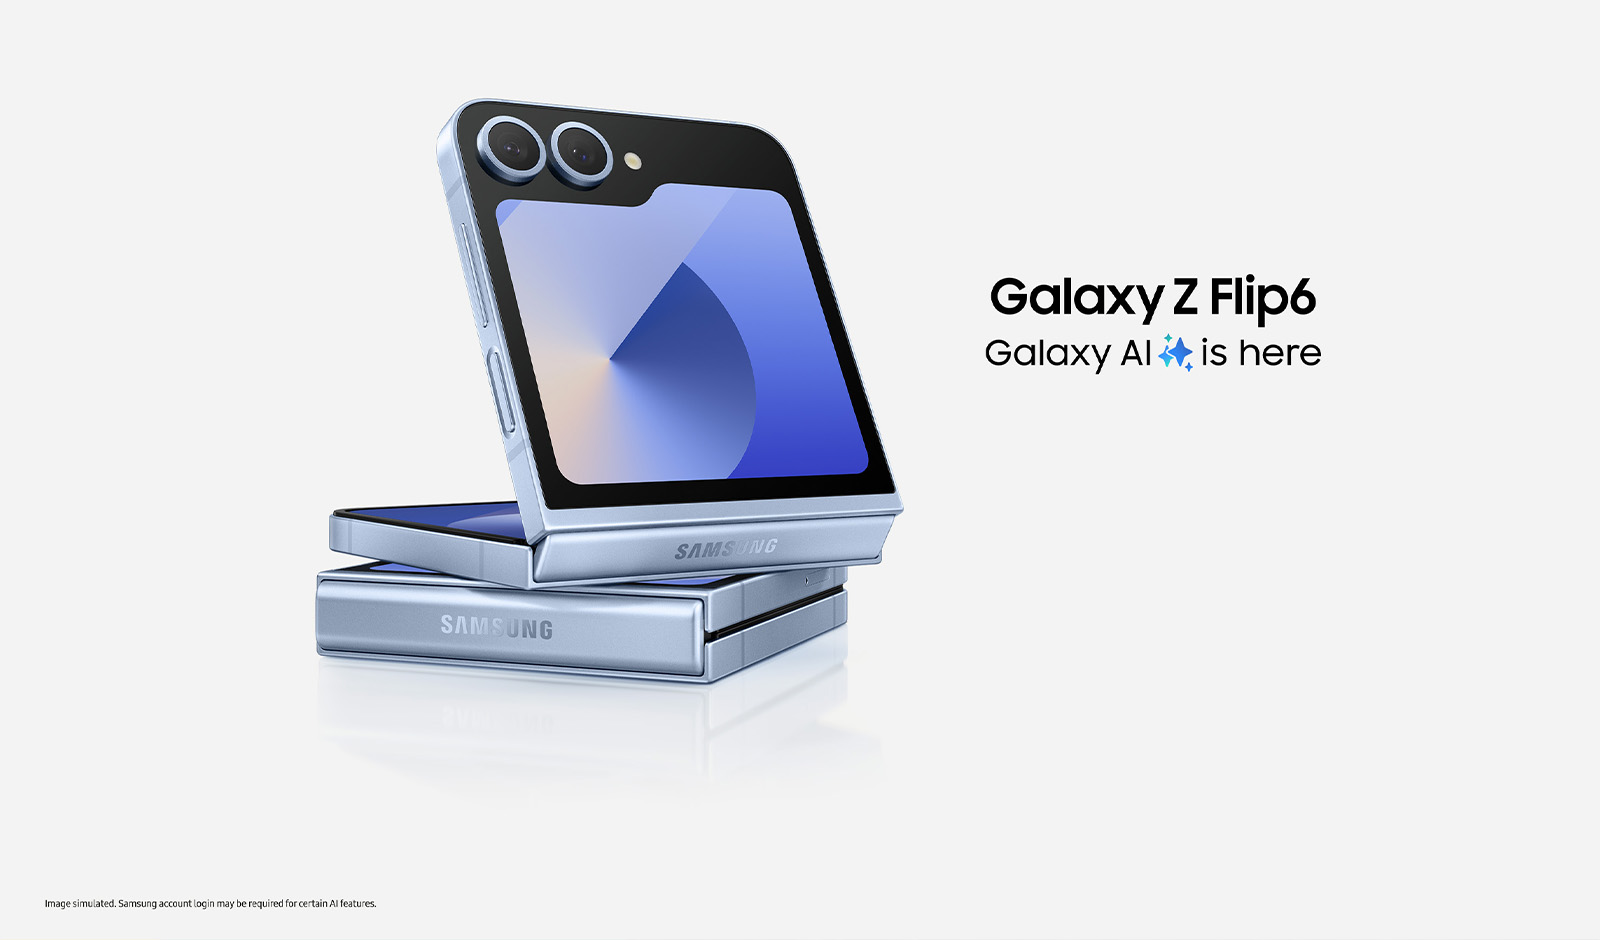 Get Galaxy Z Flip6 from £697 with Guaranteed £300 Trade in on any Galaxy S or Z Series*